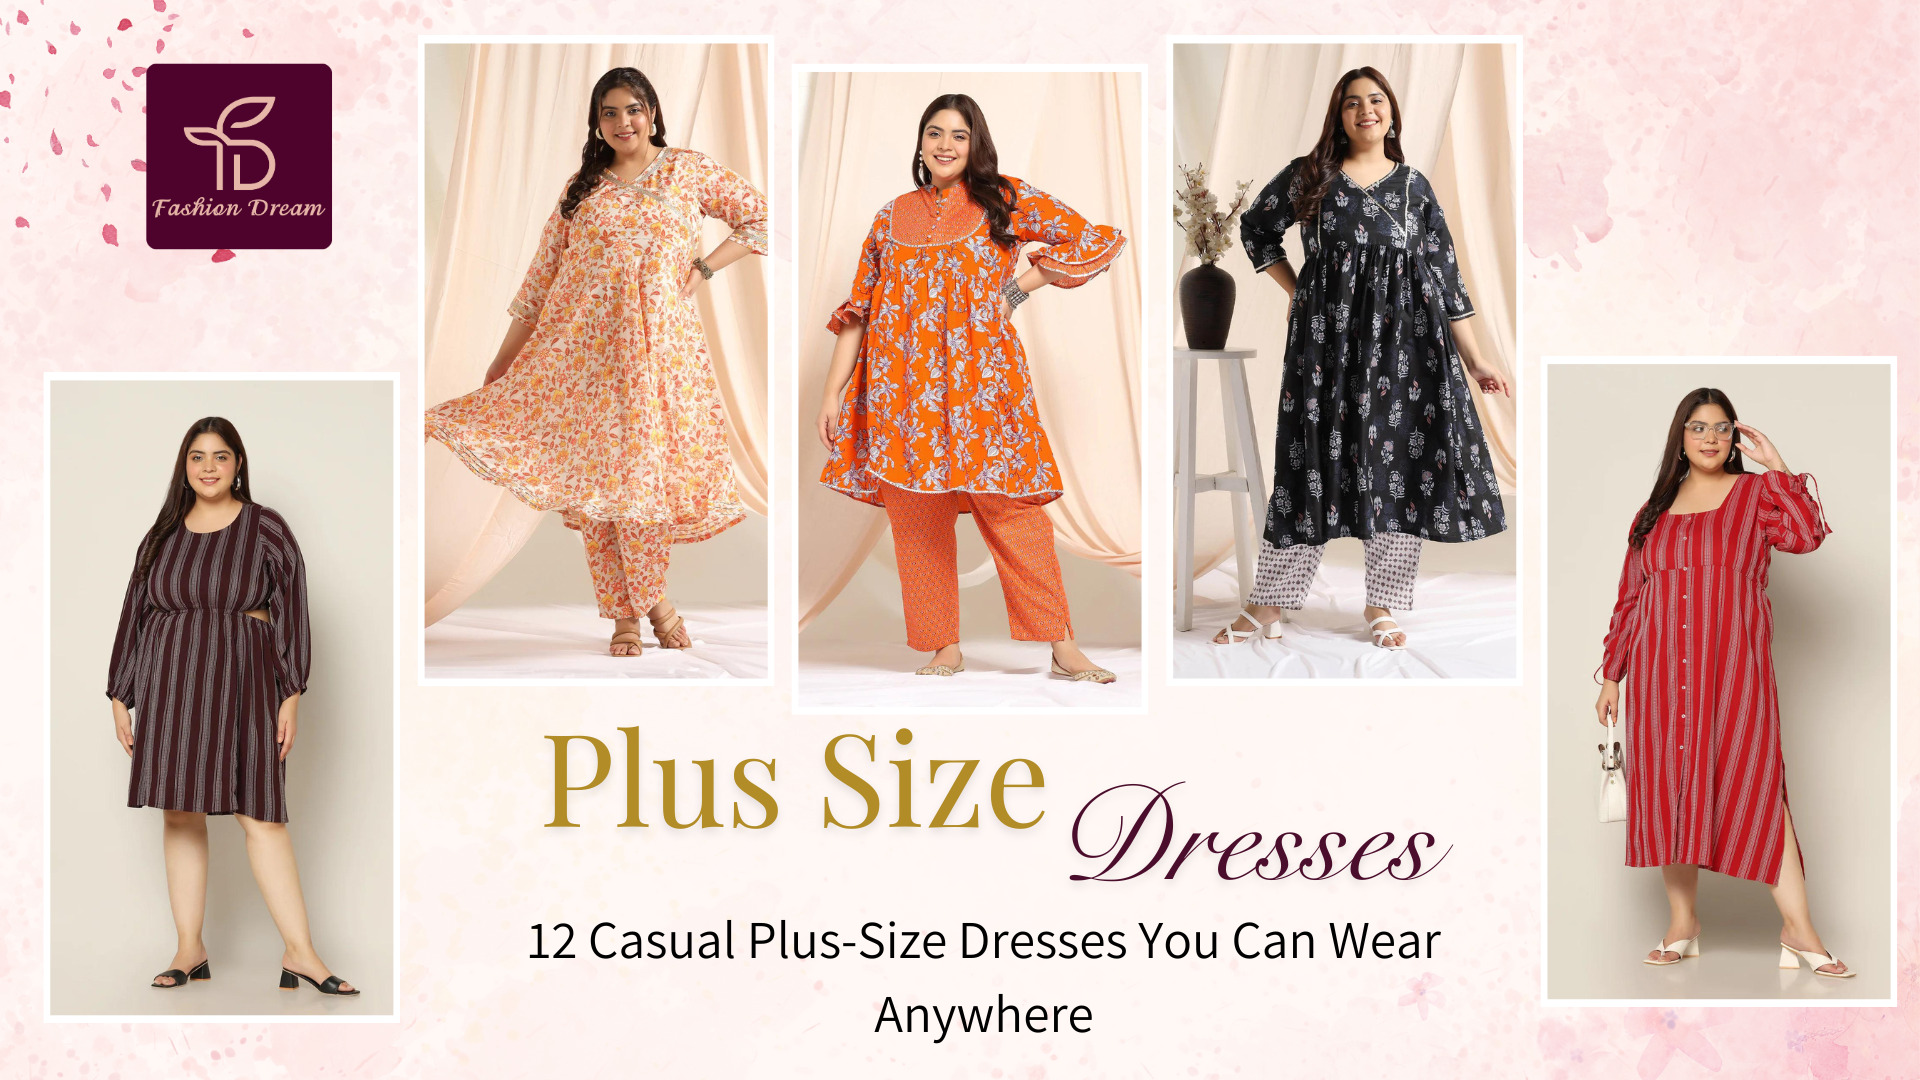 12 Casual Plus-Size Dresses You Can Wear Anywhere